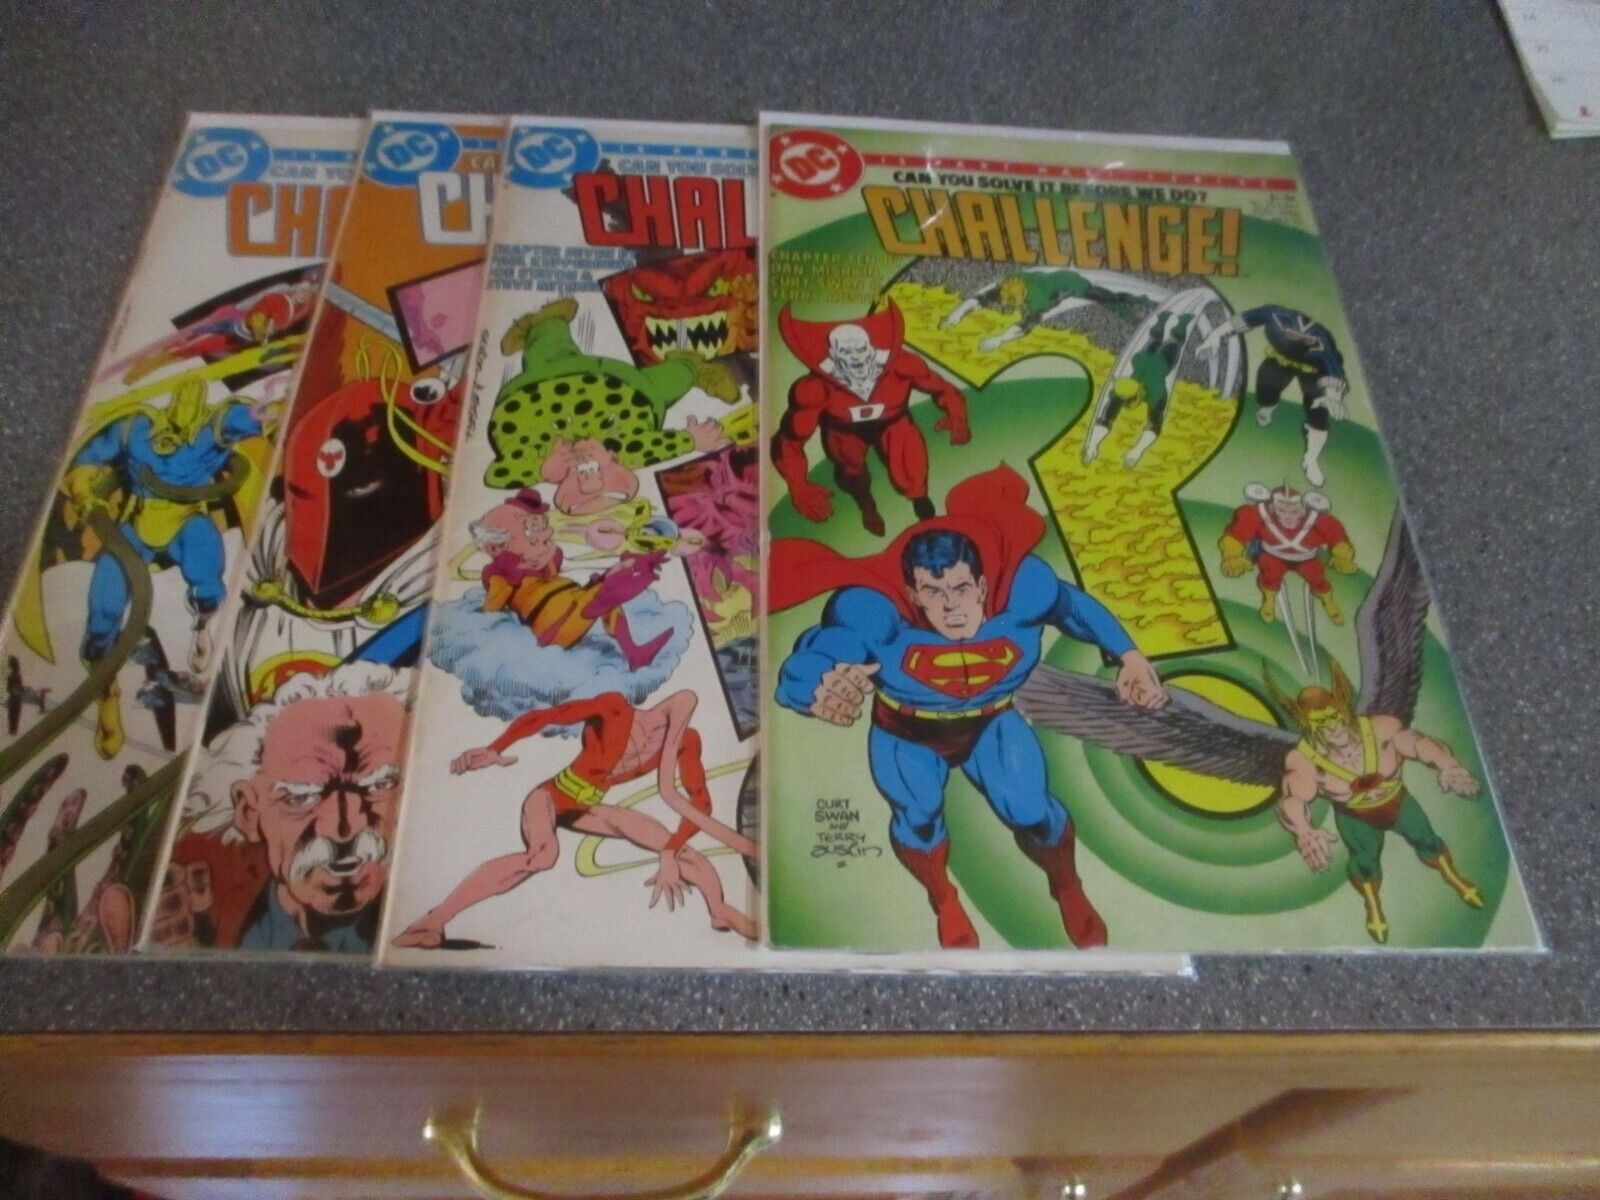 1986 DC COMICS CHALLENGE (4 ISSUES OF A 12 PART MAXI SERIES)